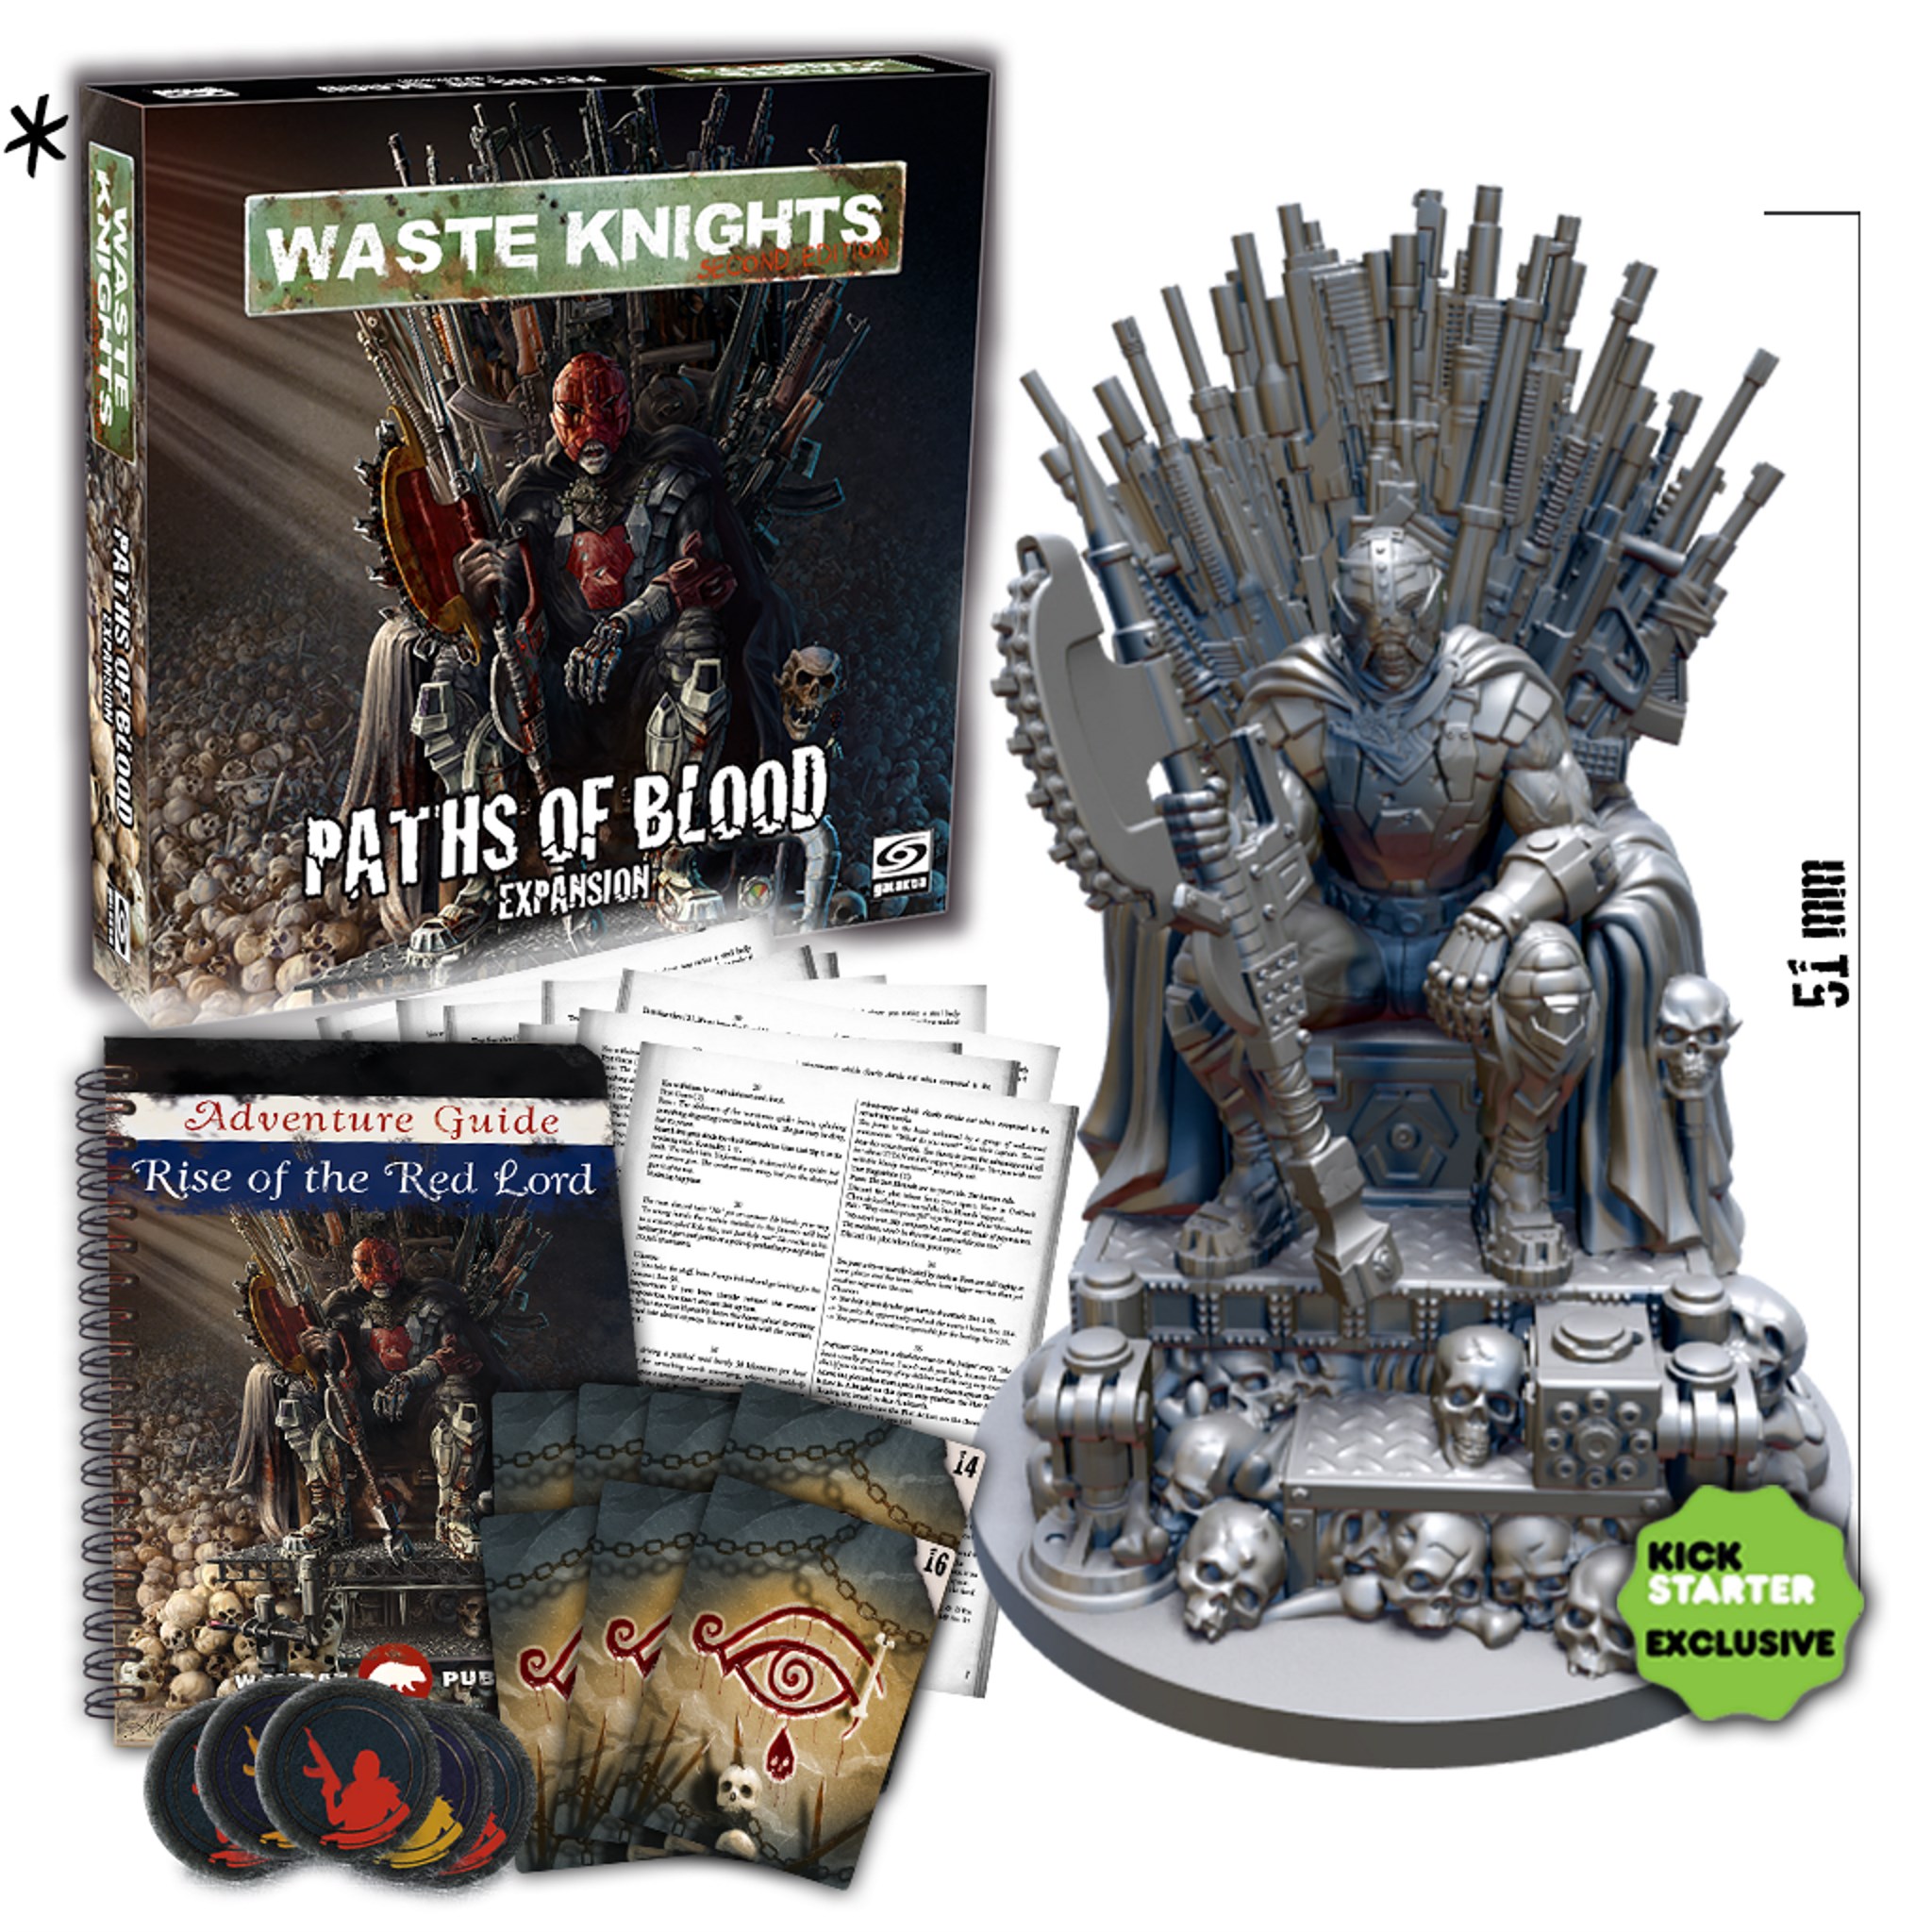 Waste Knights: Second Edition by Galakta - VETERAN OF THE WASTE 